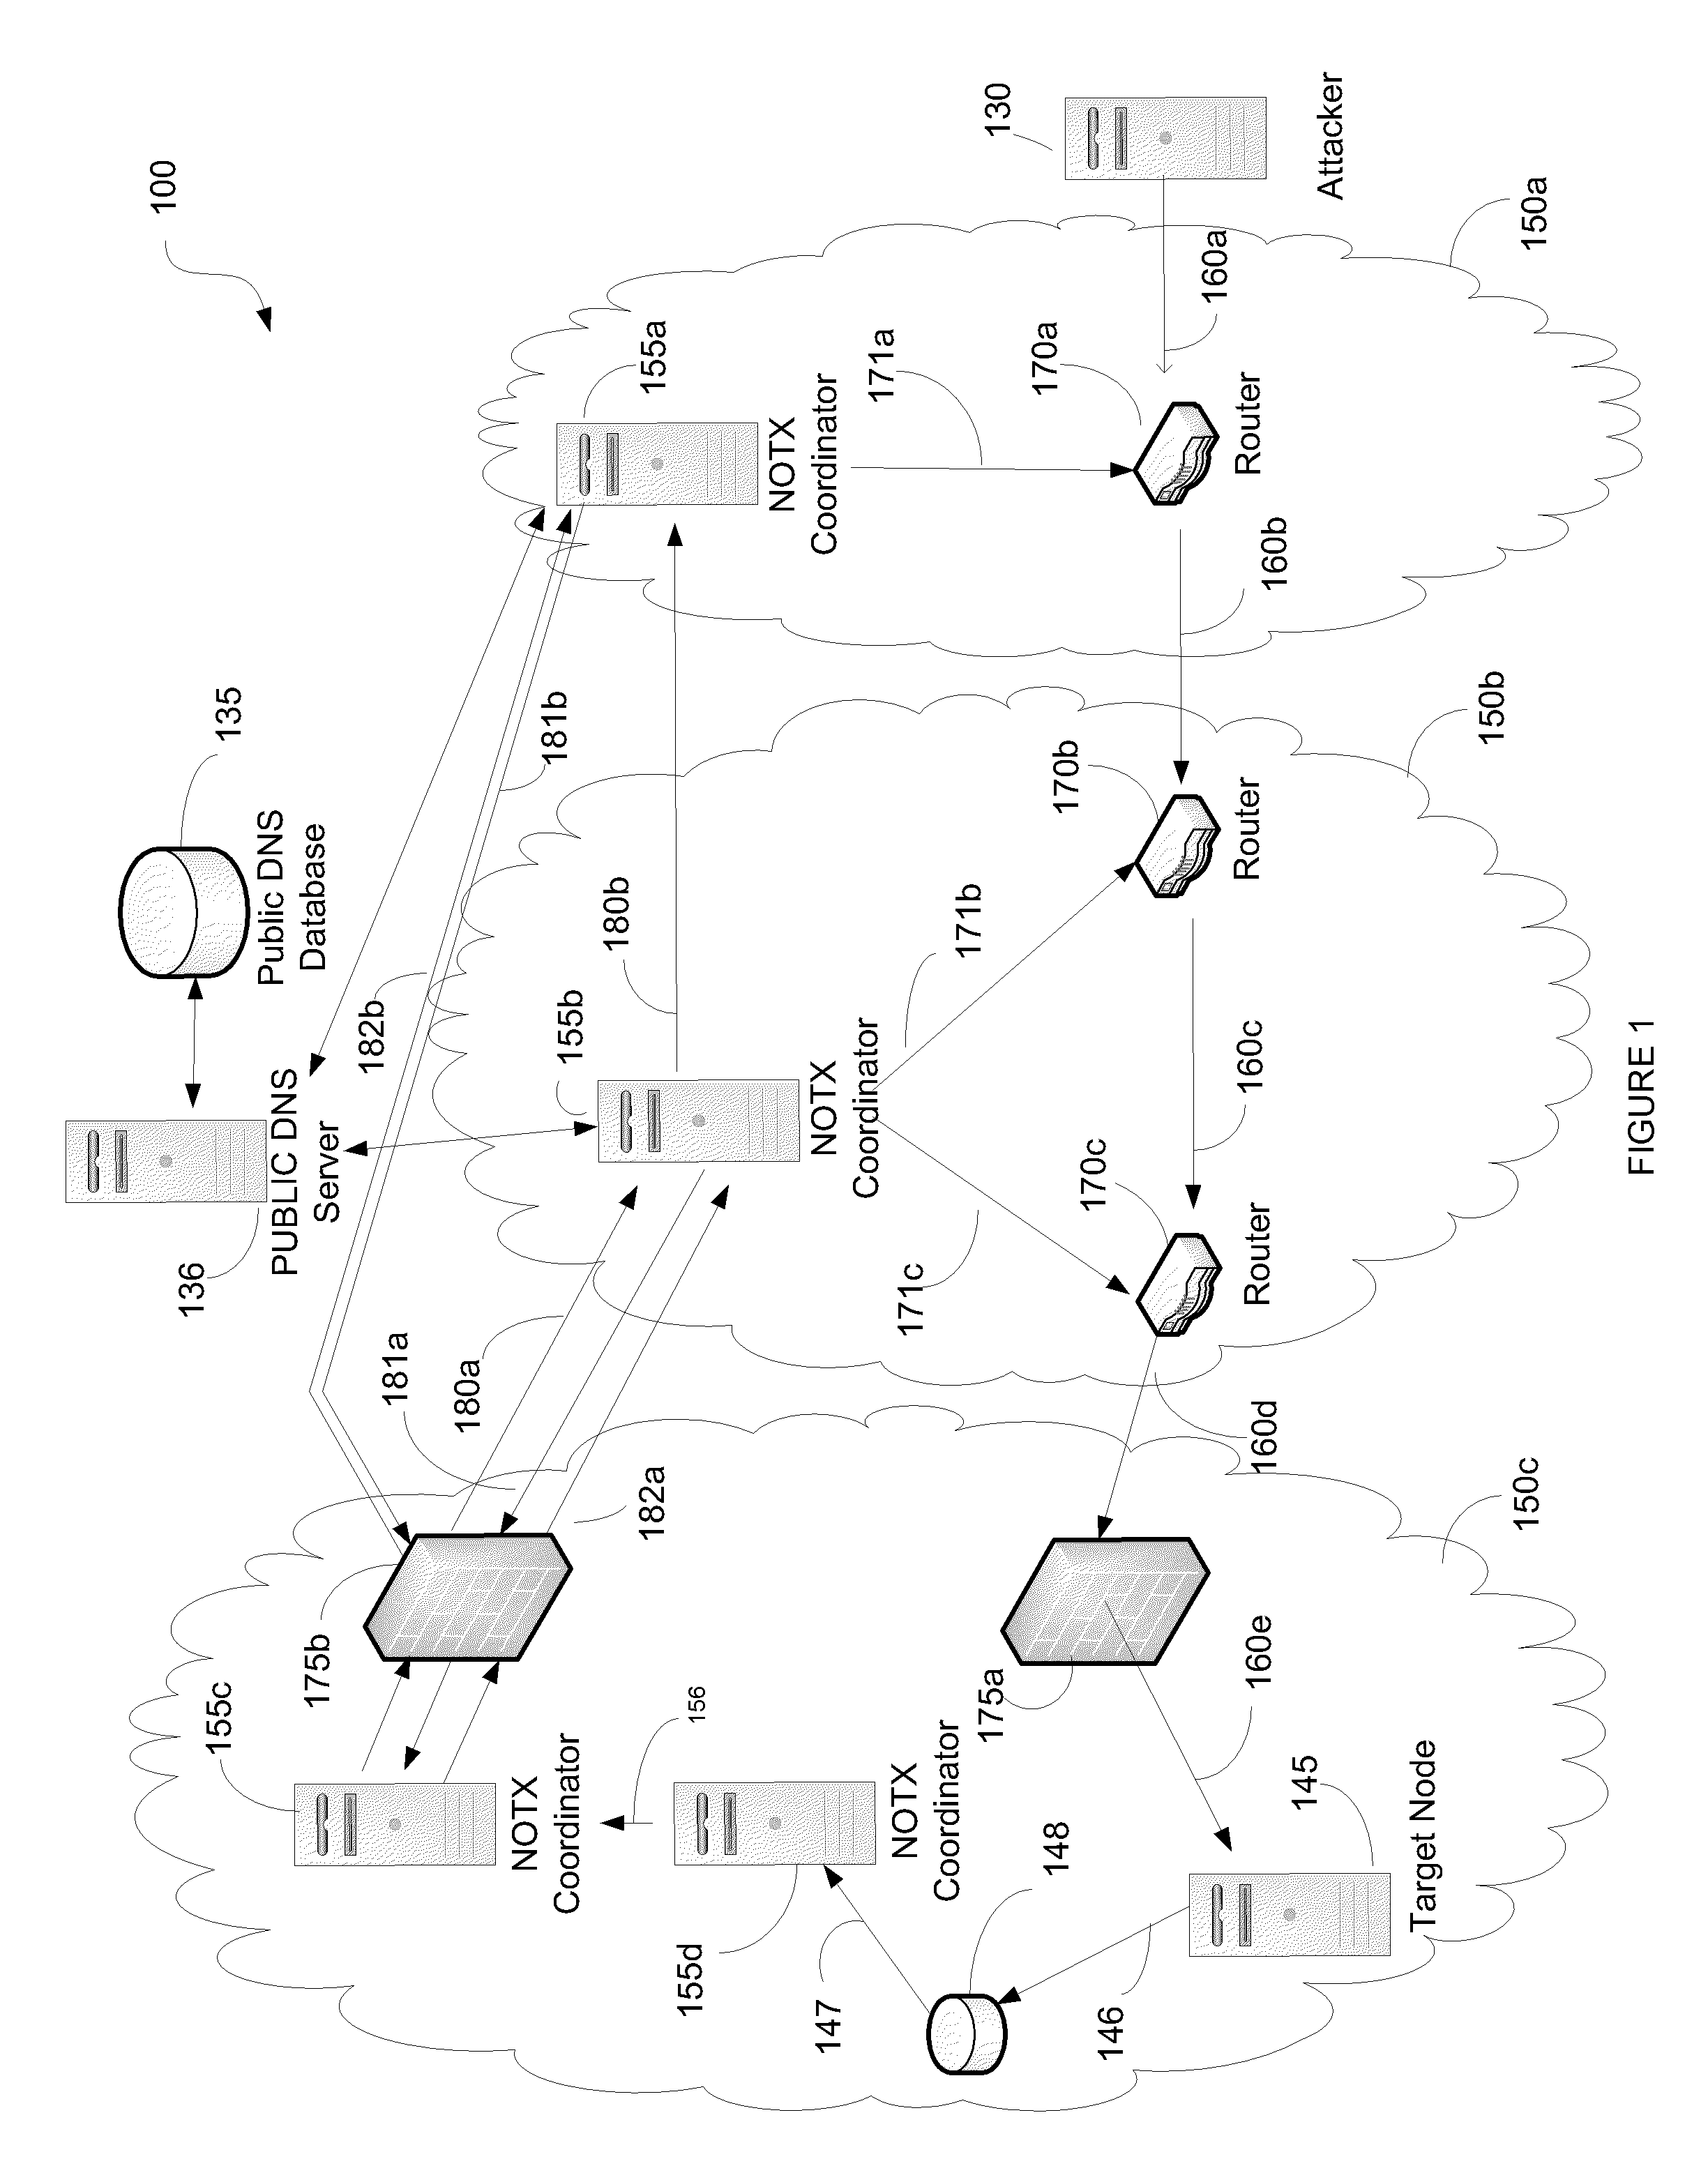 Methods and apparatus for managing network traffic